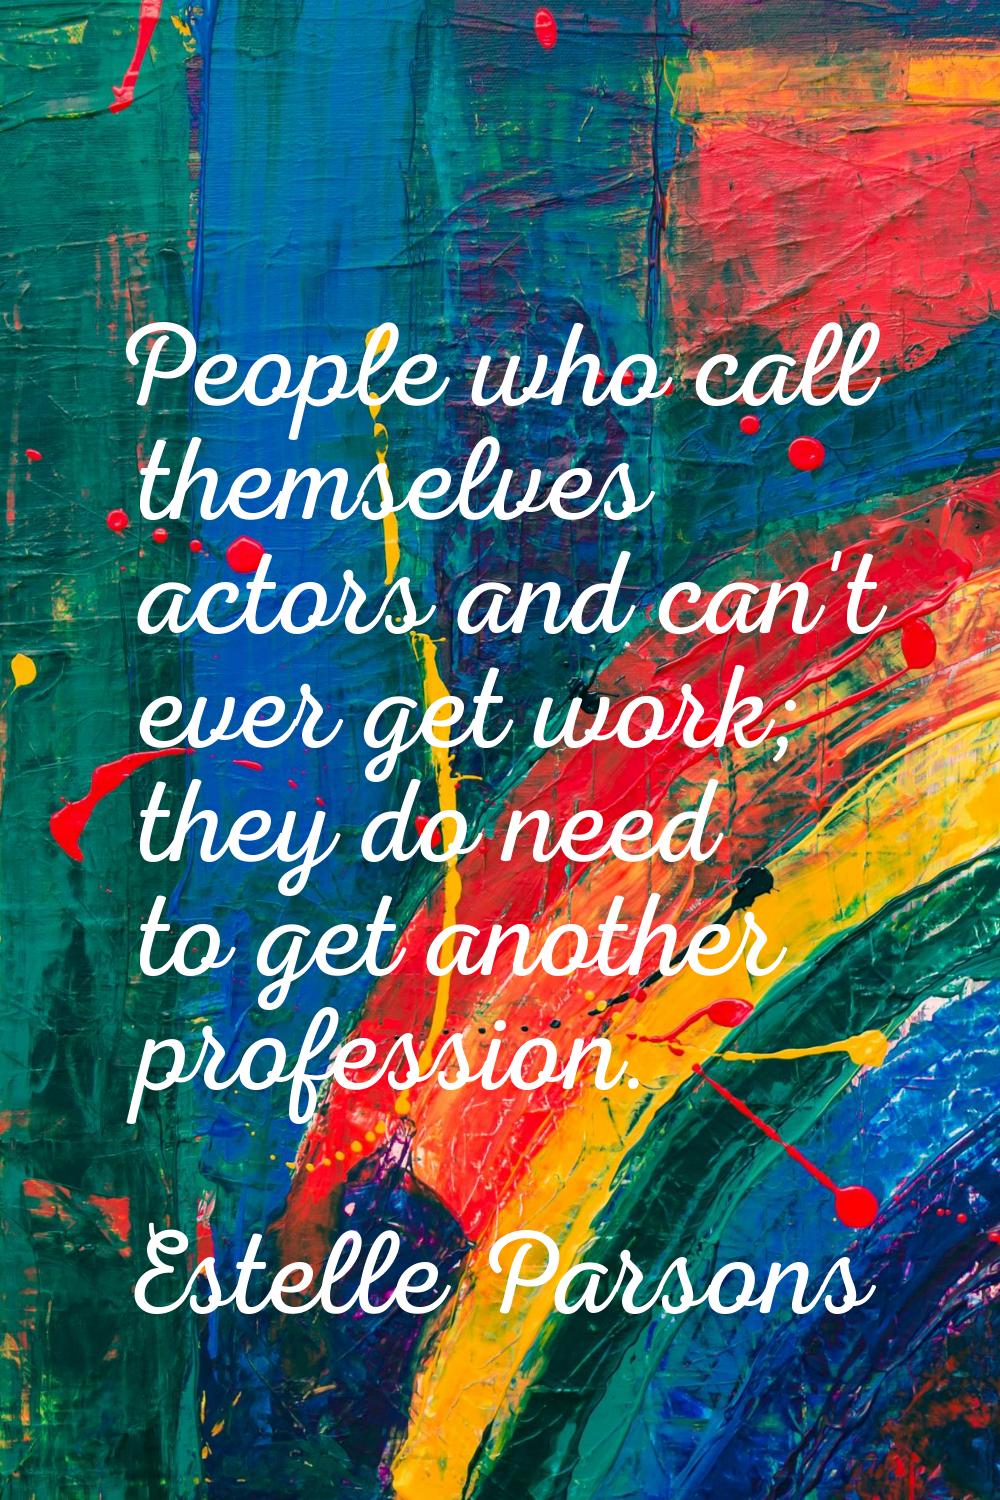 People who call themselves actors and can't ever get work; they do need to get another profession.